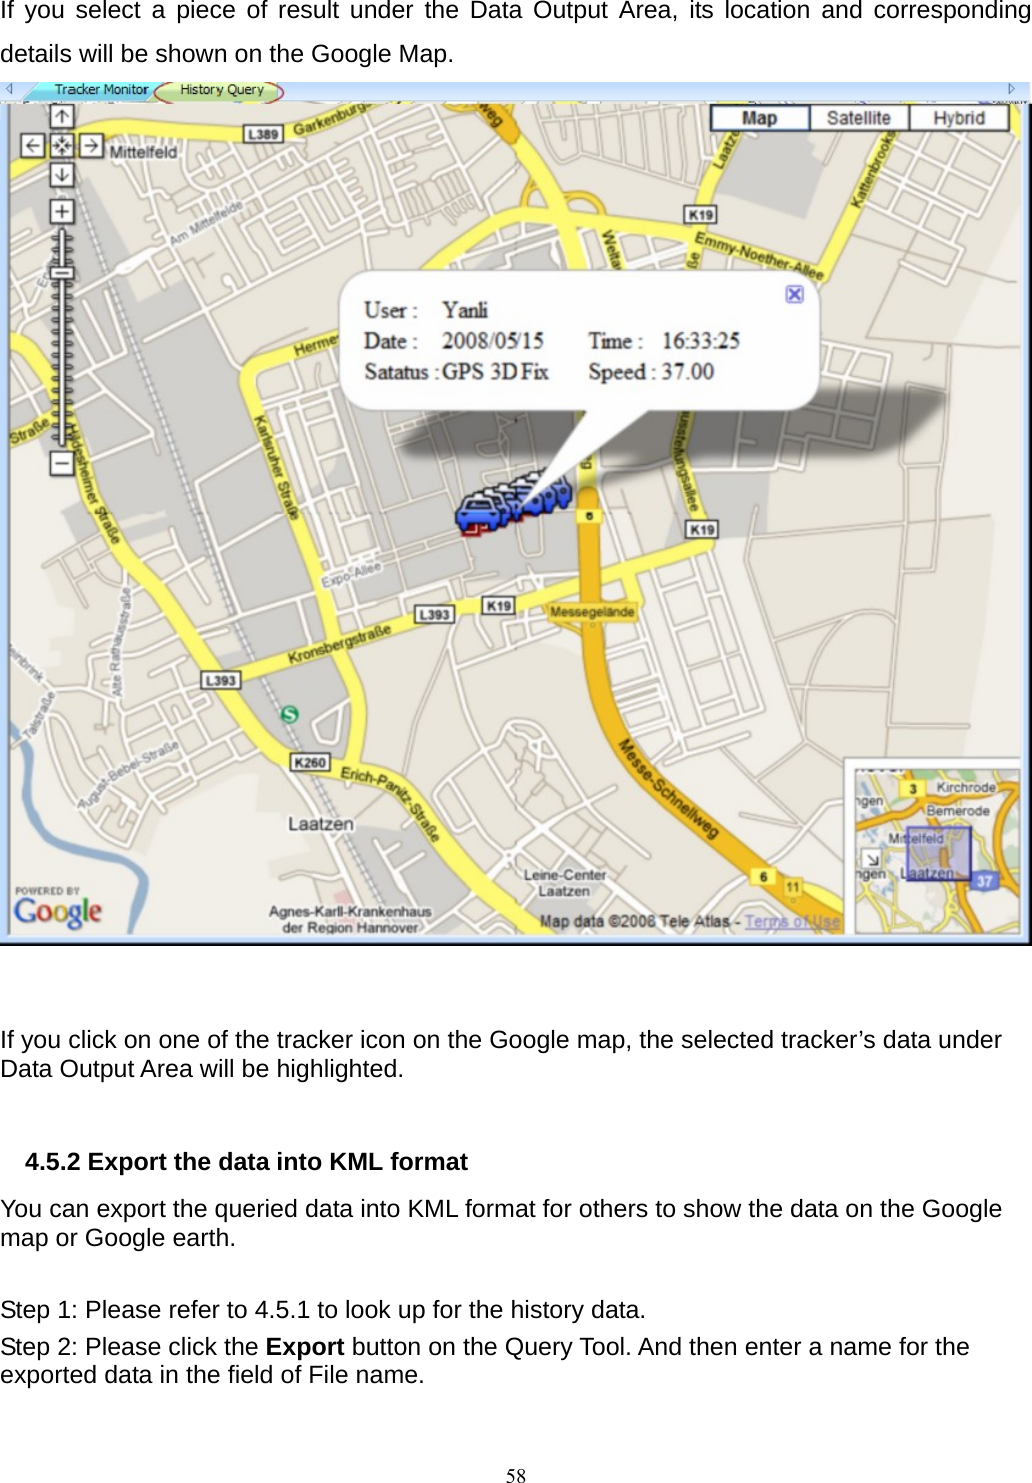 If you select a piece of result under the Data Output Area, its location and corresponding details will be shown on the Google Map.      If you click on one of the tracker icon on the Google map, the selected tracker’s data under Data Output Area will be highlighted.  4.5.2 Export the data into KML format You can export the queried data into KML format for others to show the data on the Google map or Google earth.  Step 1: Please refer to 4.5.1 to look up for the history data. Step 2: Please click the Export button on the Query Tool. And then enter a name for the exported data in the field of File name.  58